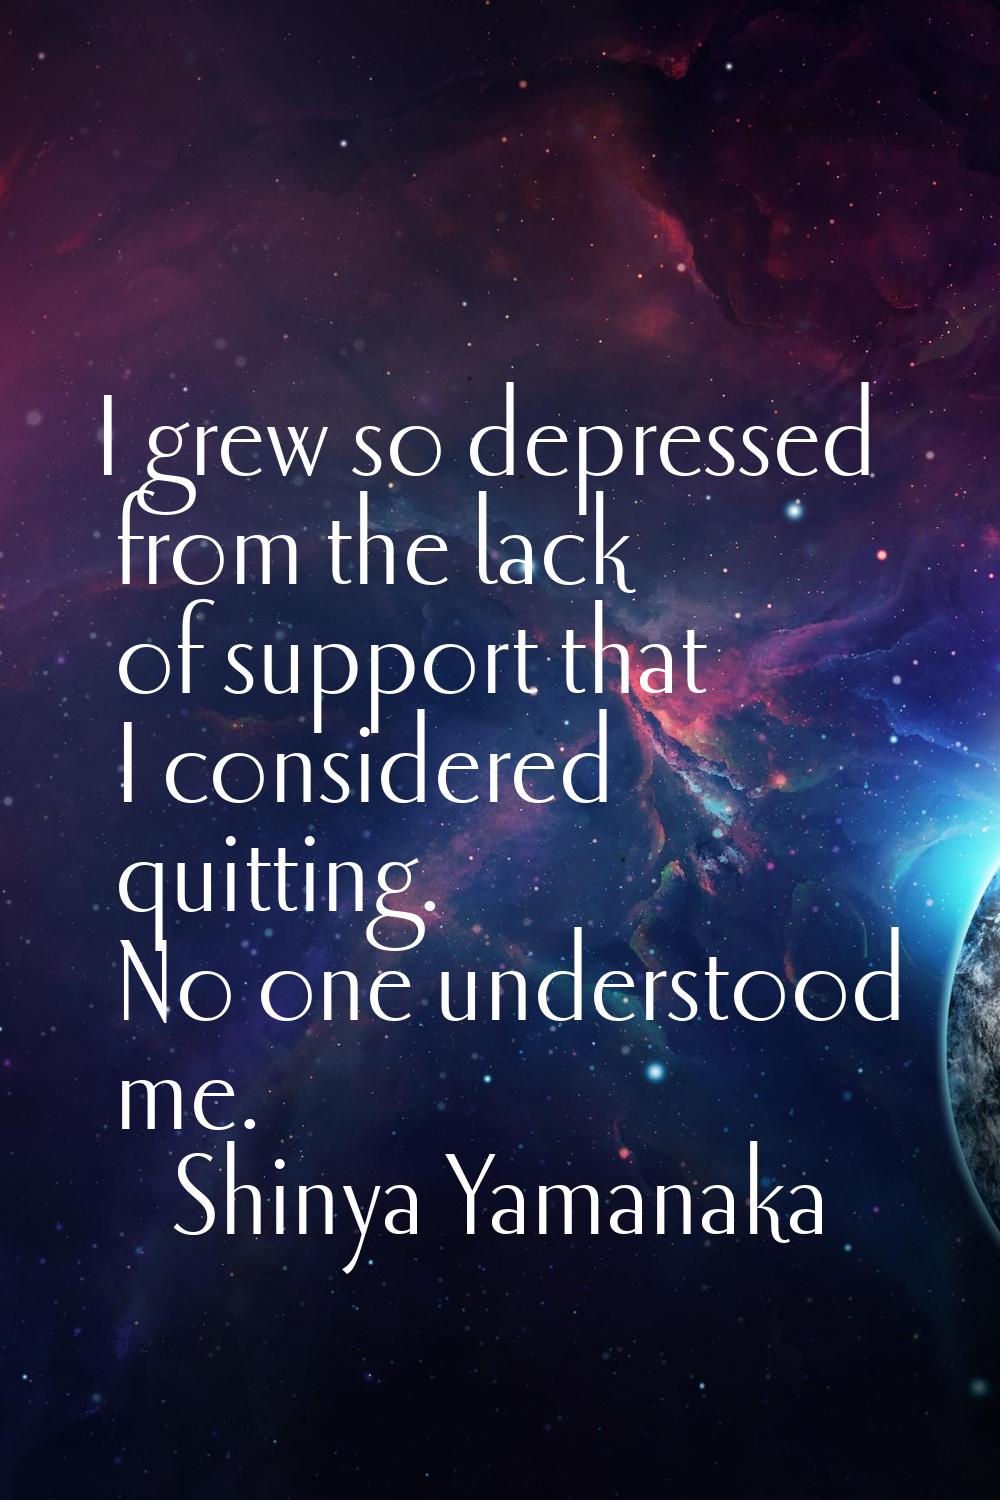 I grew so depressed from the lack of support that I considered quitting. No one understood me.